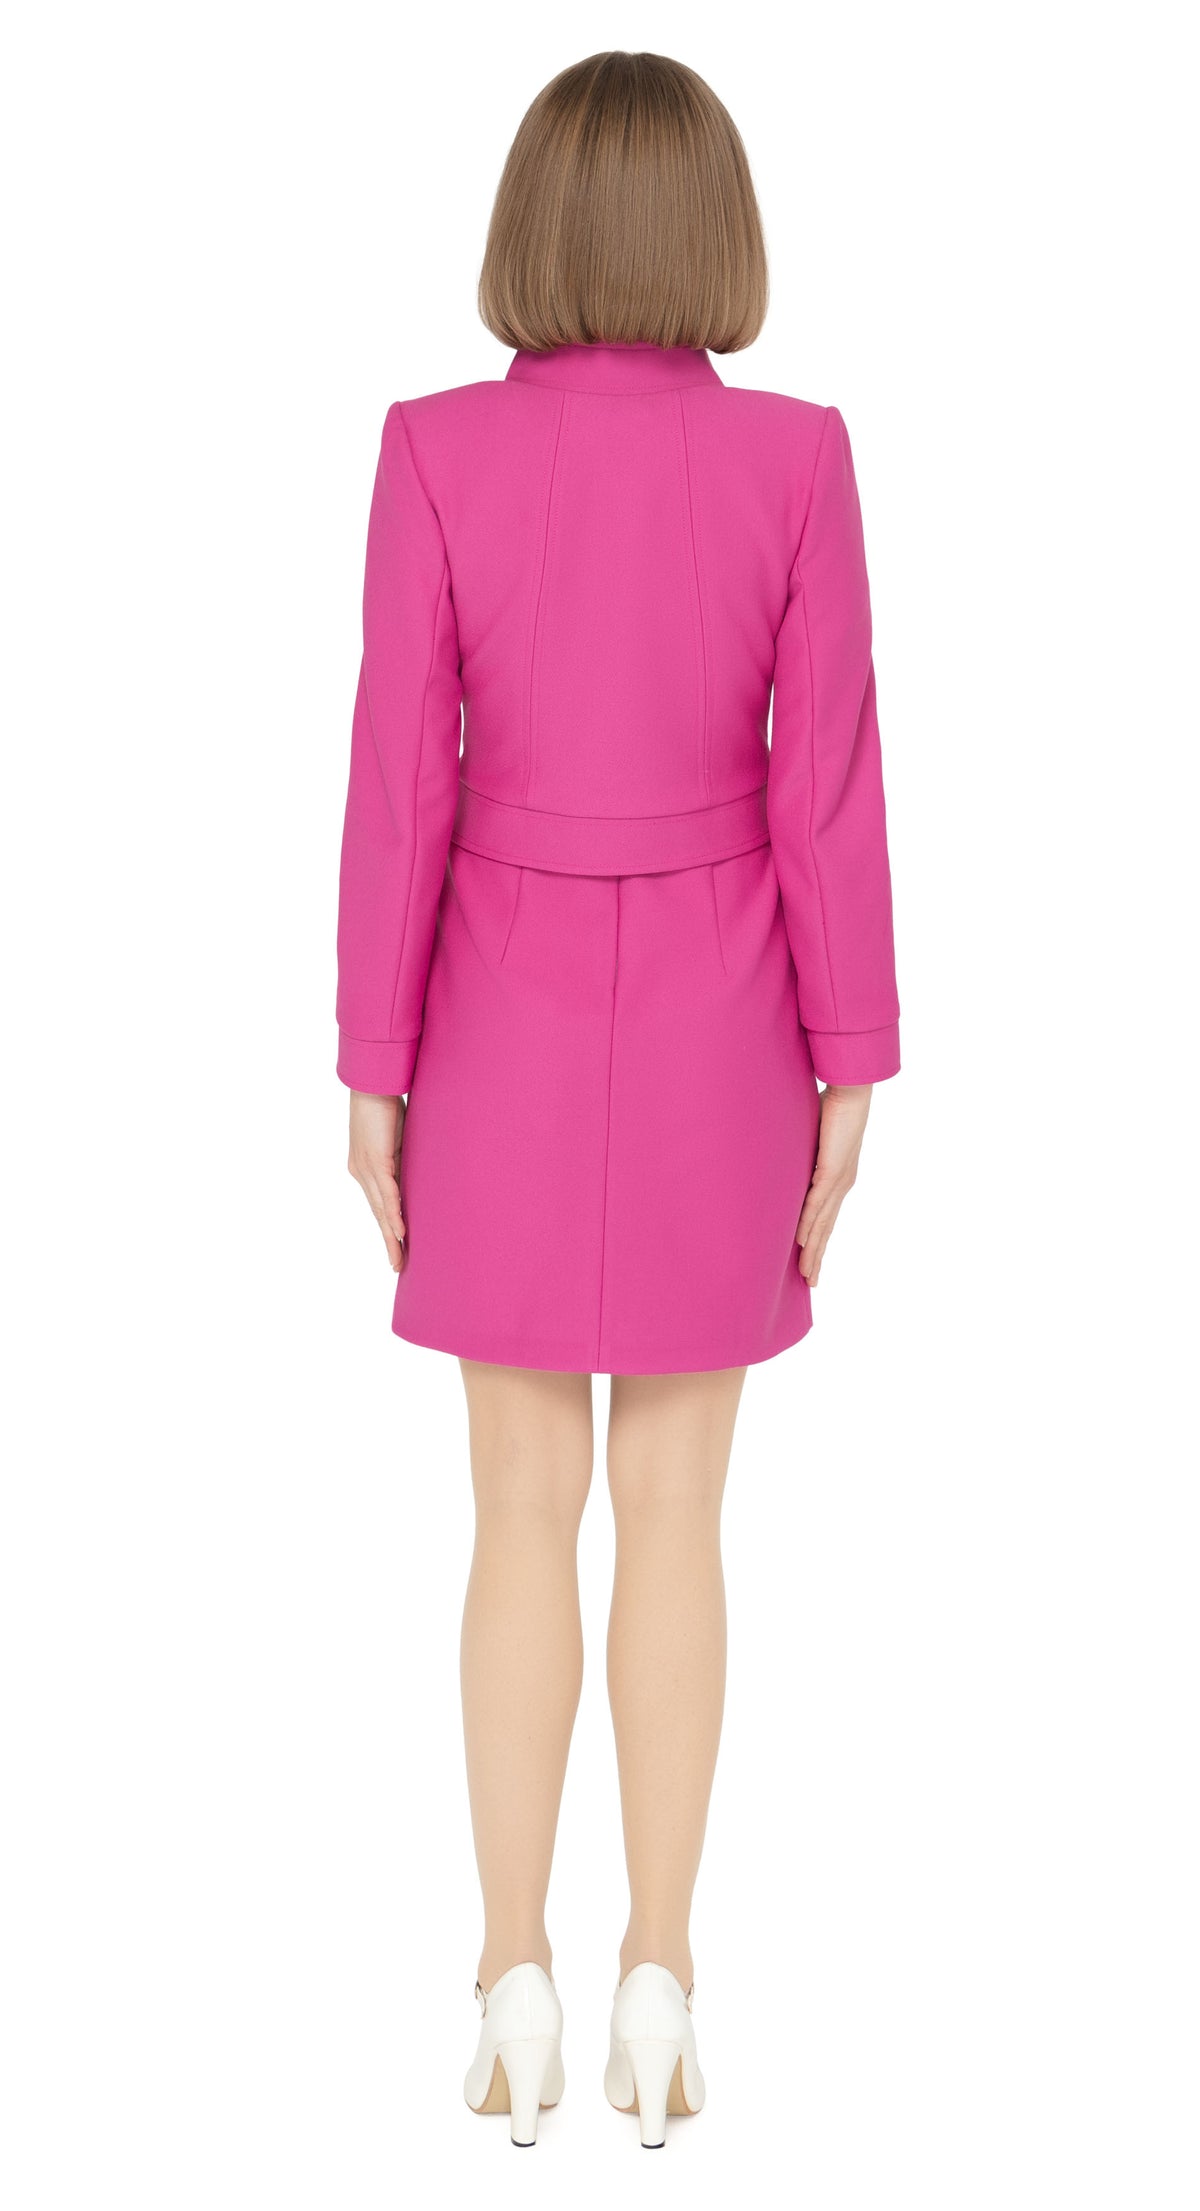 Our bold fitted fuchsia jacket is a statement piece that announces arrival. The stunningly tailored aesthetic of this jacket is immediately visible within the collar design and retro offset looped front zipper closure. Our seasoned pattern makers have outdone themselves with this superb example of a modern, cool aesthetic. 